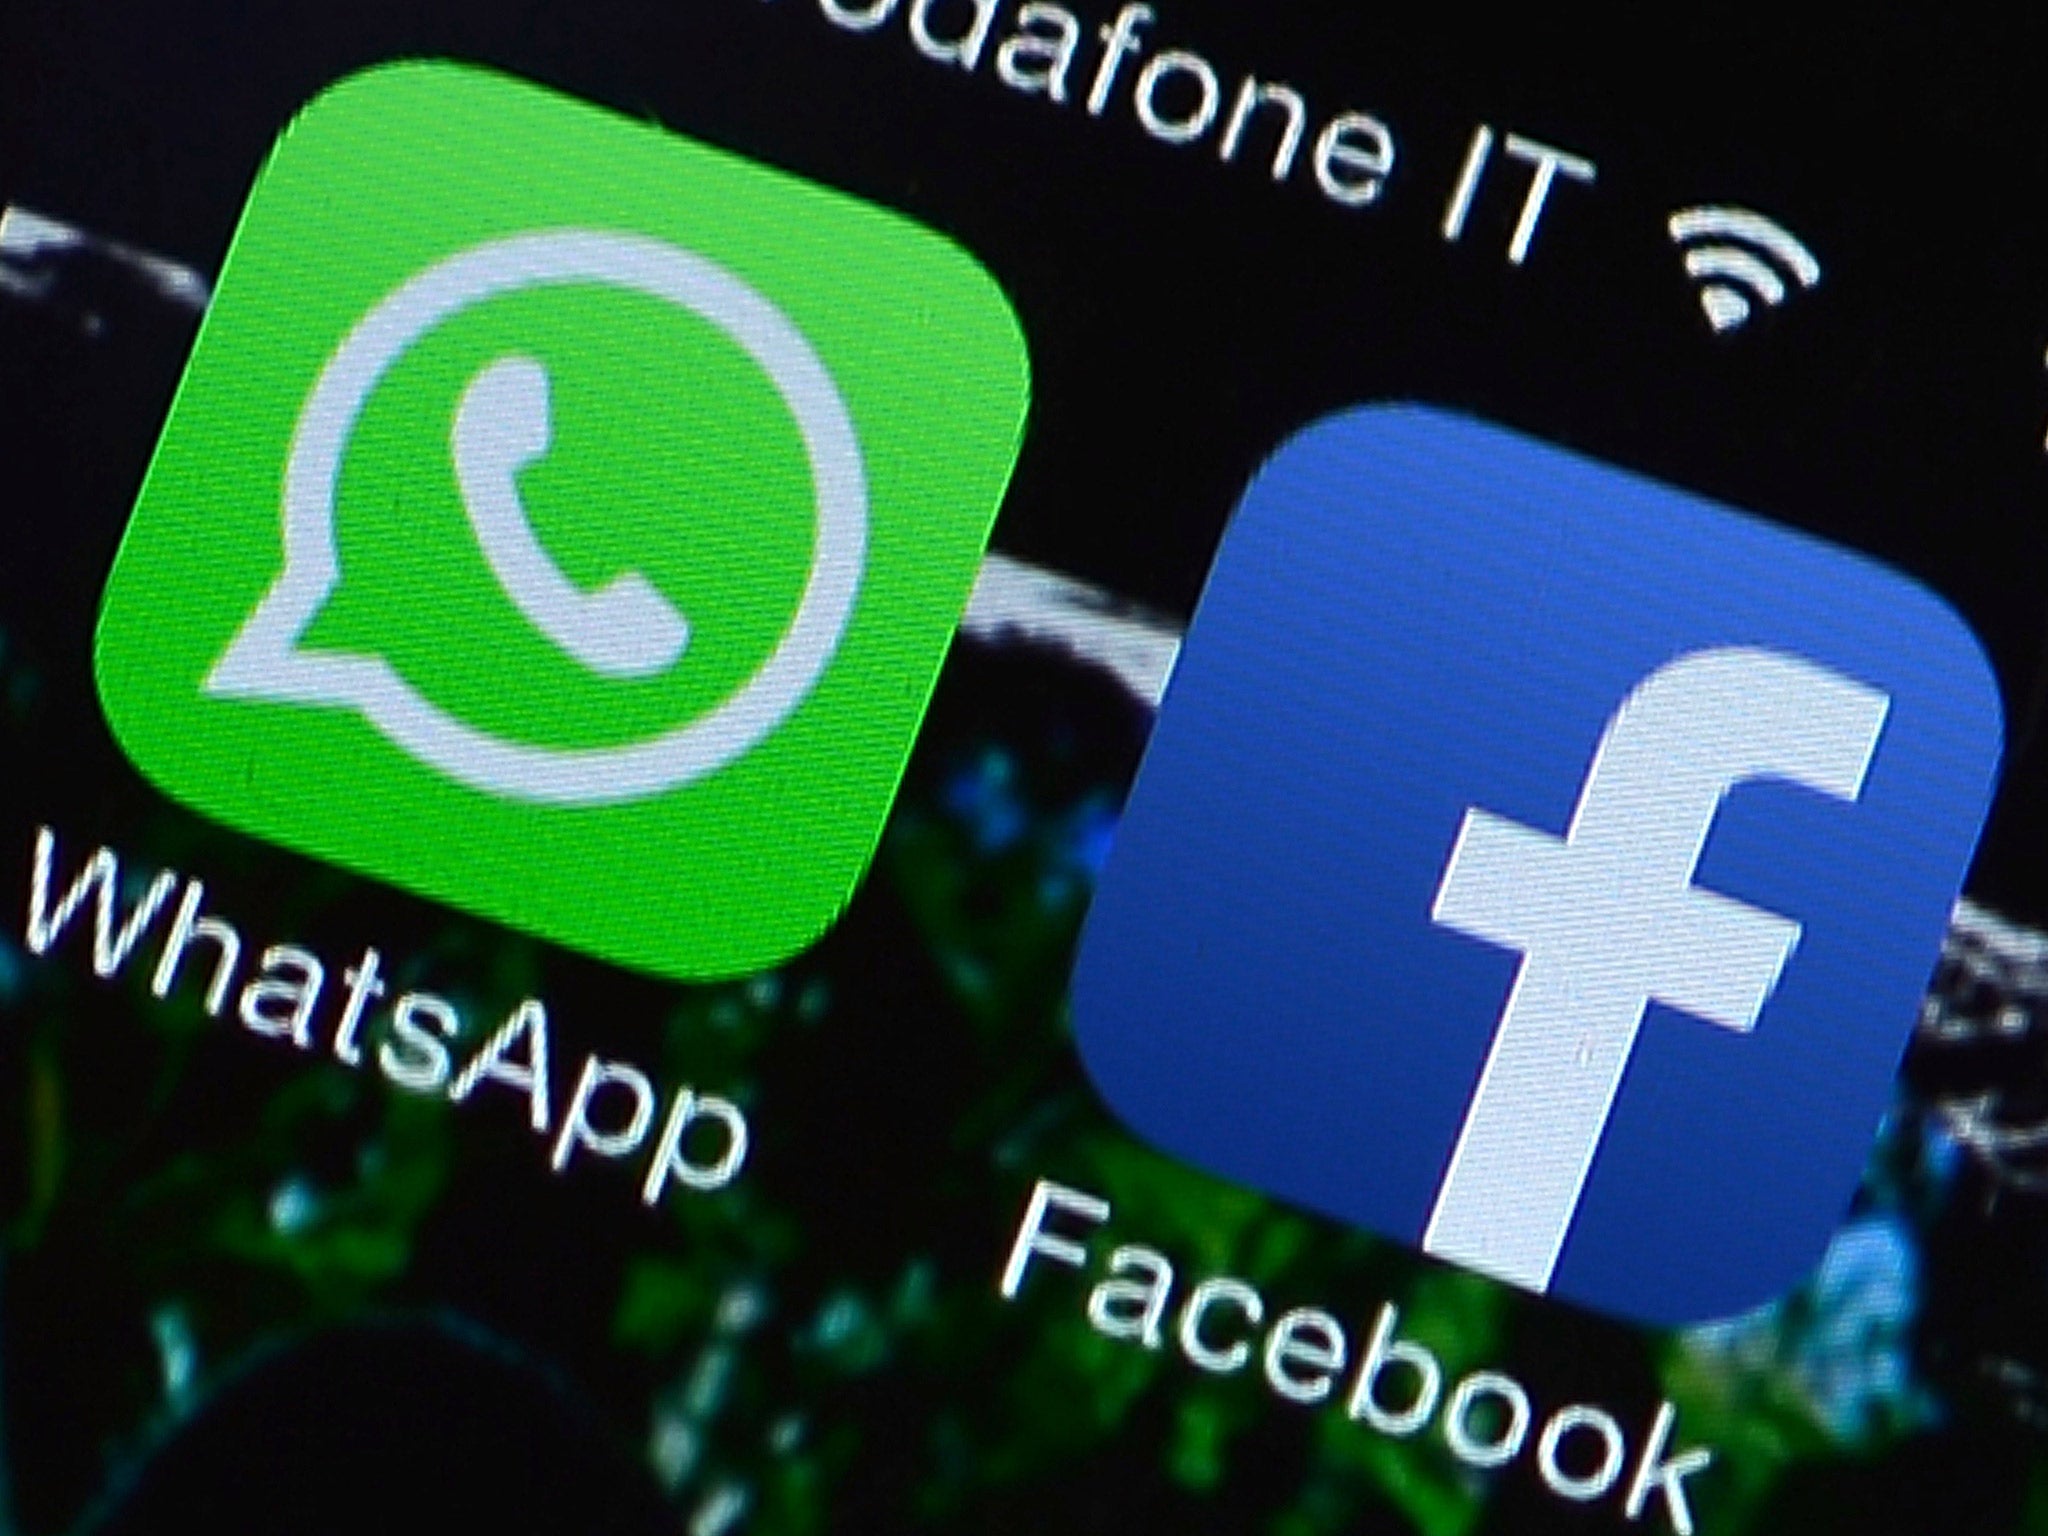 Last year Facebook bought WhatsApp in a deal worth $19bn